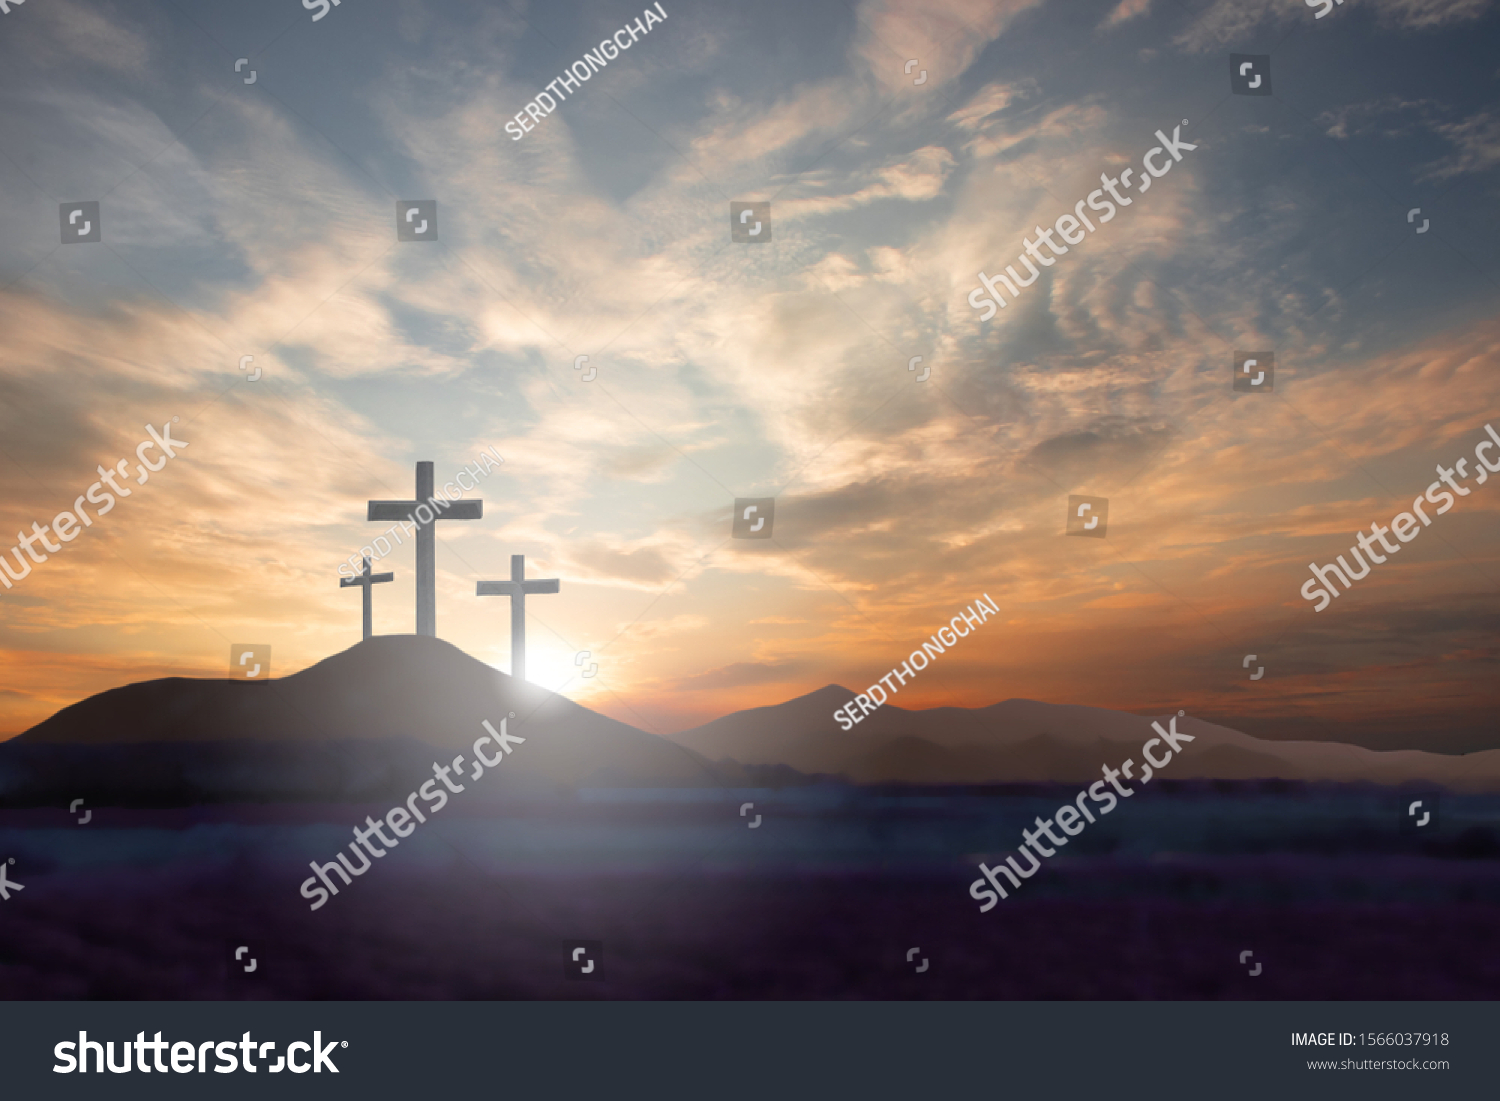 Three crosses on the mountain Jesus Christ with a sunset background #1566037918